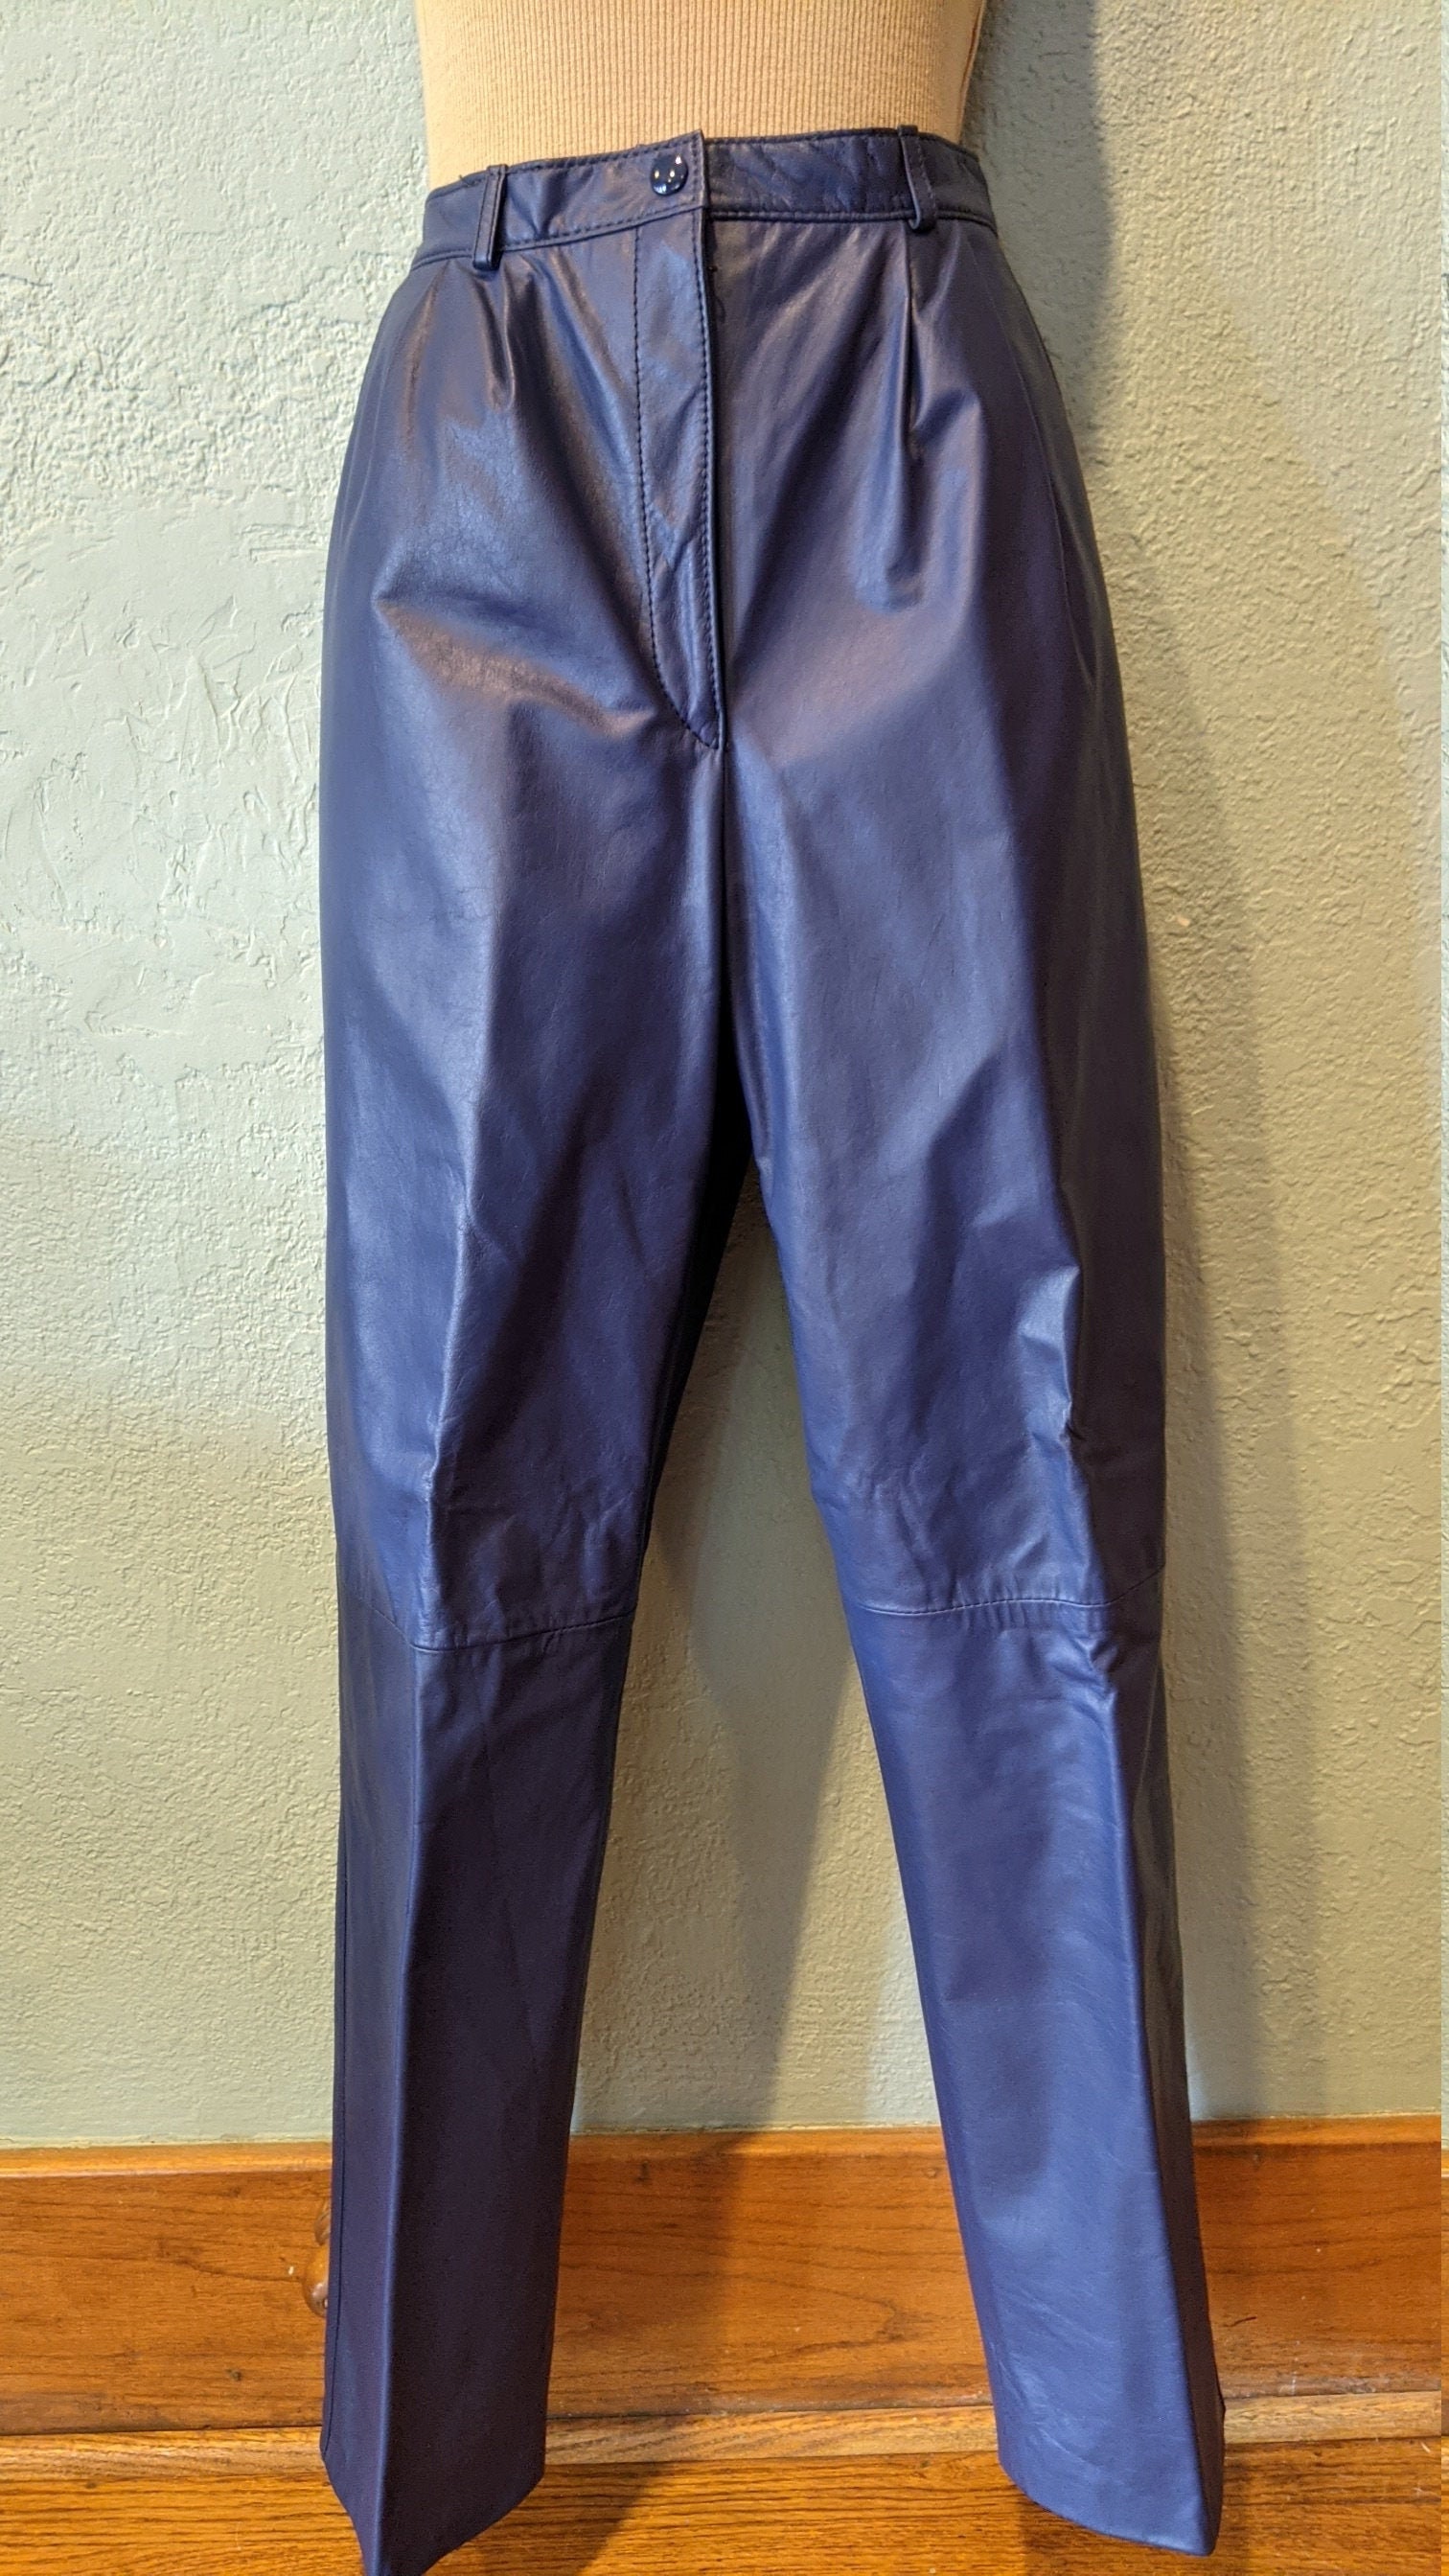 80's High Waist Pleated Leather Pants NWT Size 10, Waist is 28 inches ...